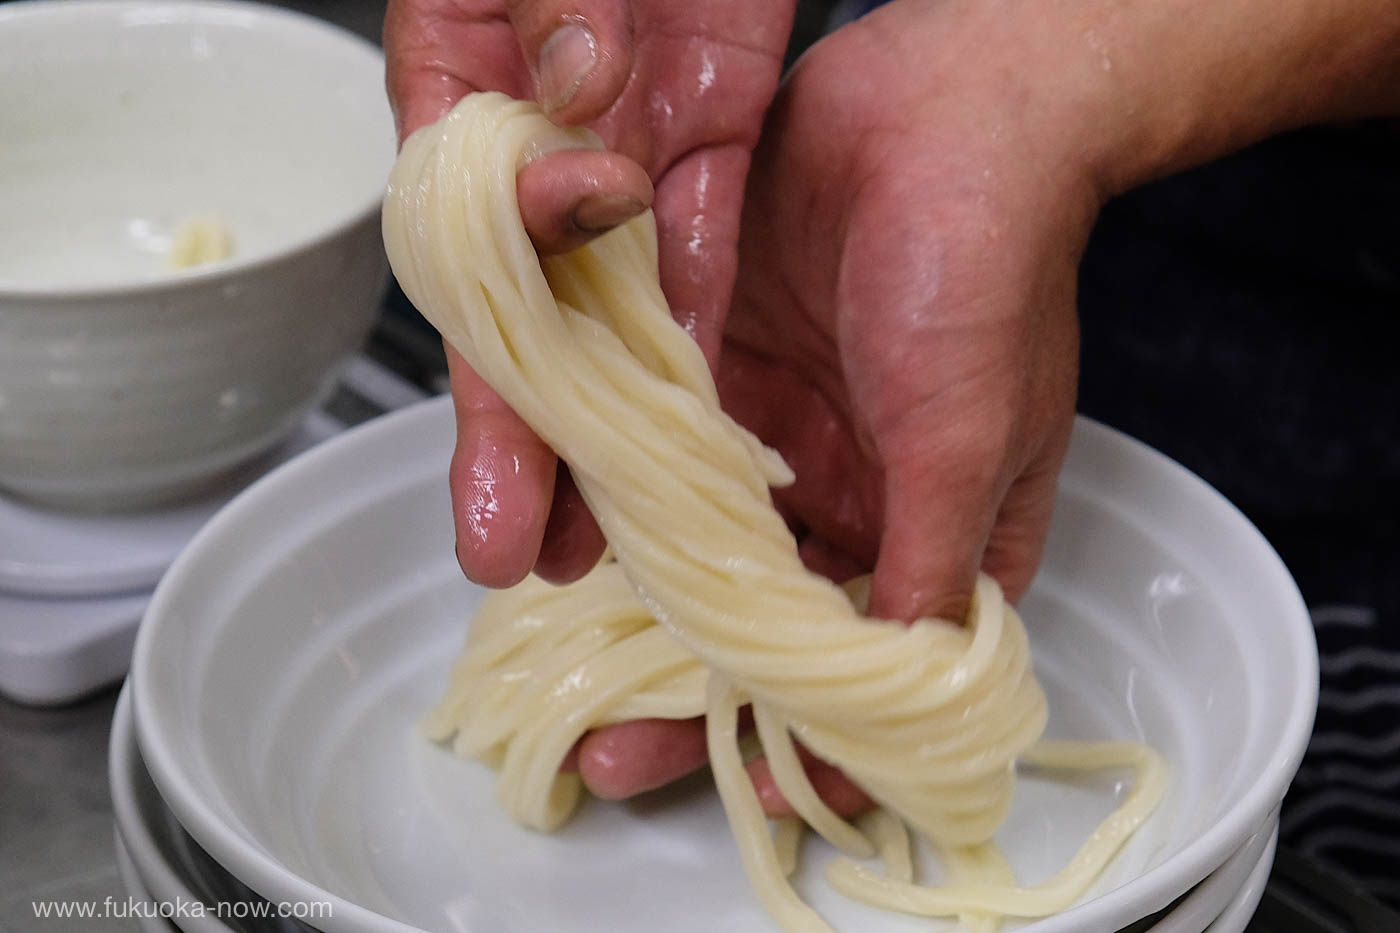 Itoshima Shiraito Udon Yasuji - Fresh noodles made from Japanese wheat with a firm texture, 糸島白糸うどんやすじの、国産小麦を使ったコシがある生麺